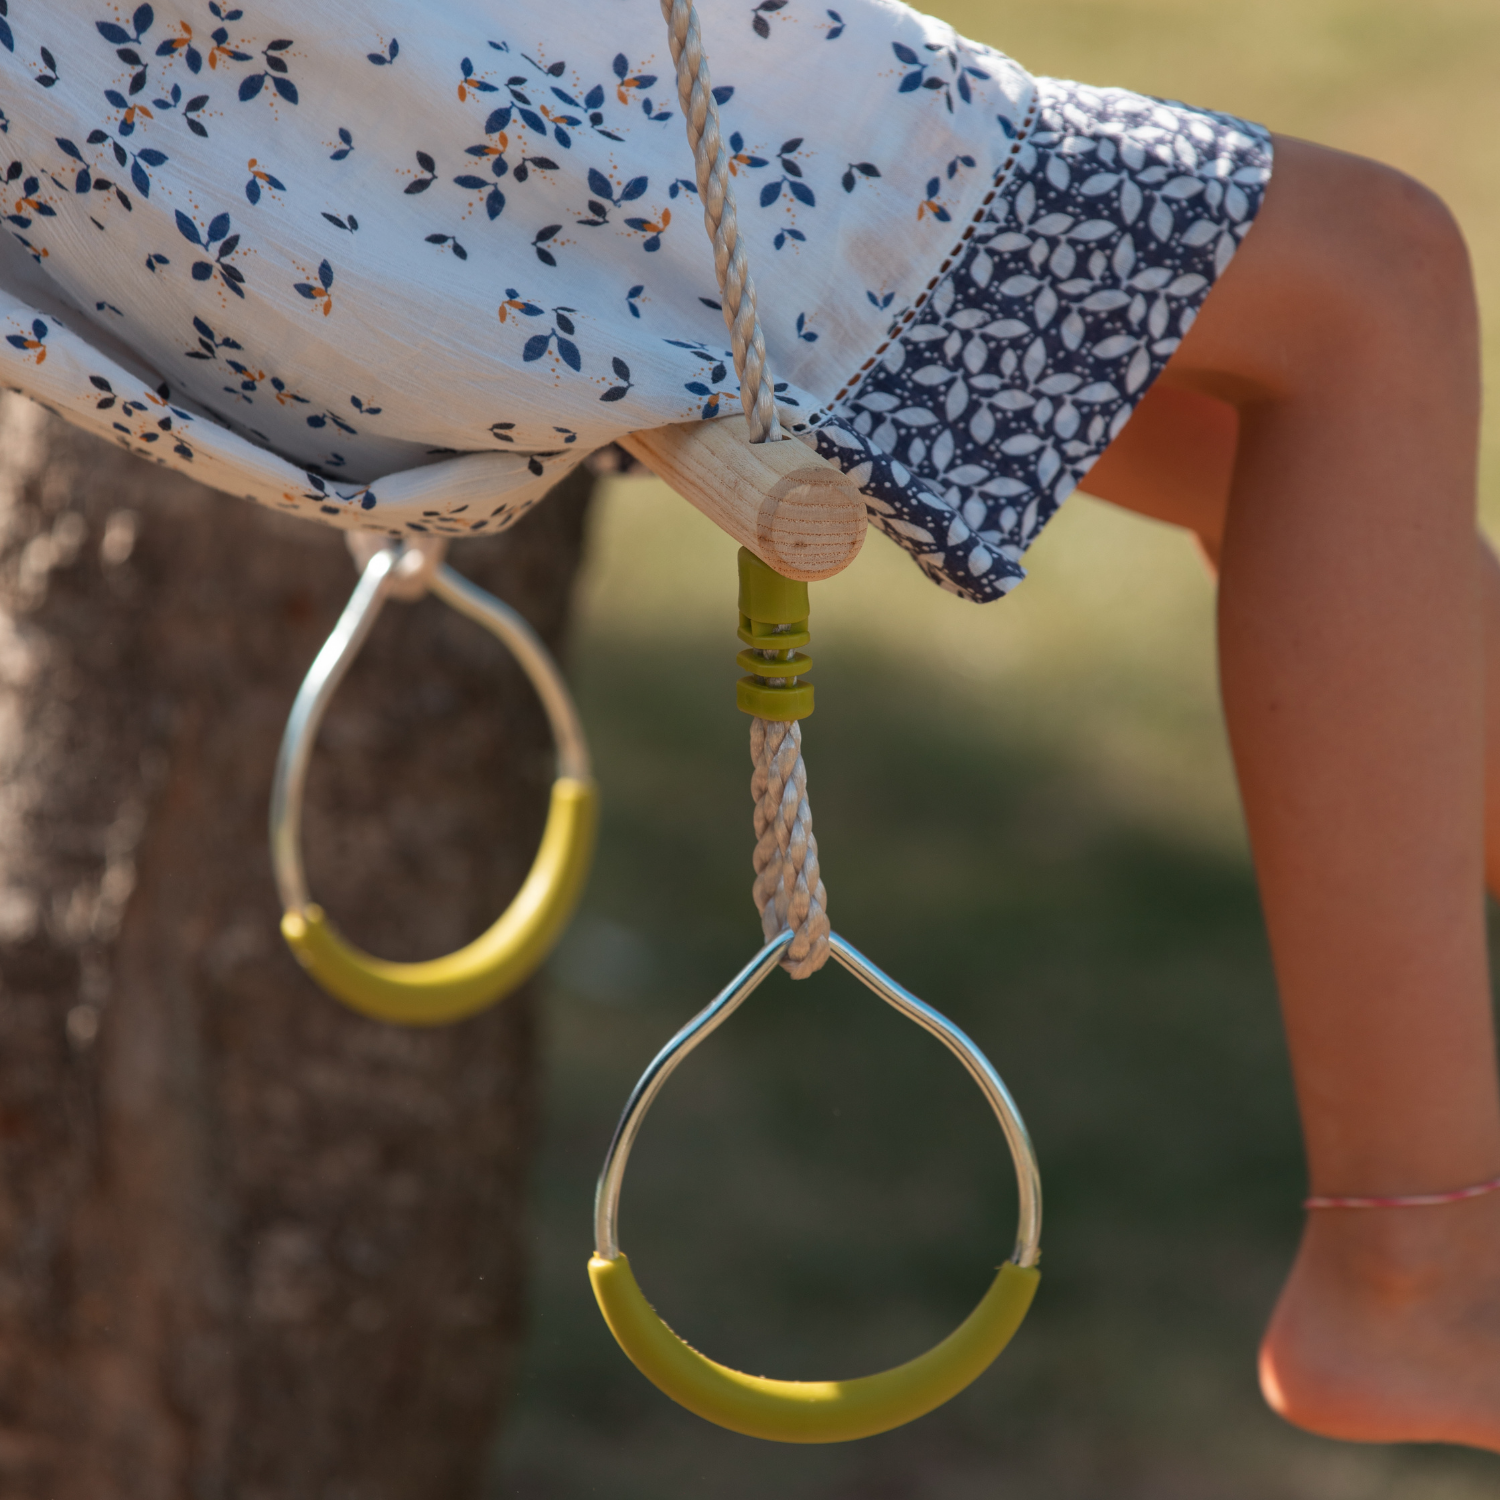 Wood trapeze with a pair of metal rings for 2 to 2.5m frame, swing set piece, accessory Photo2